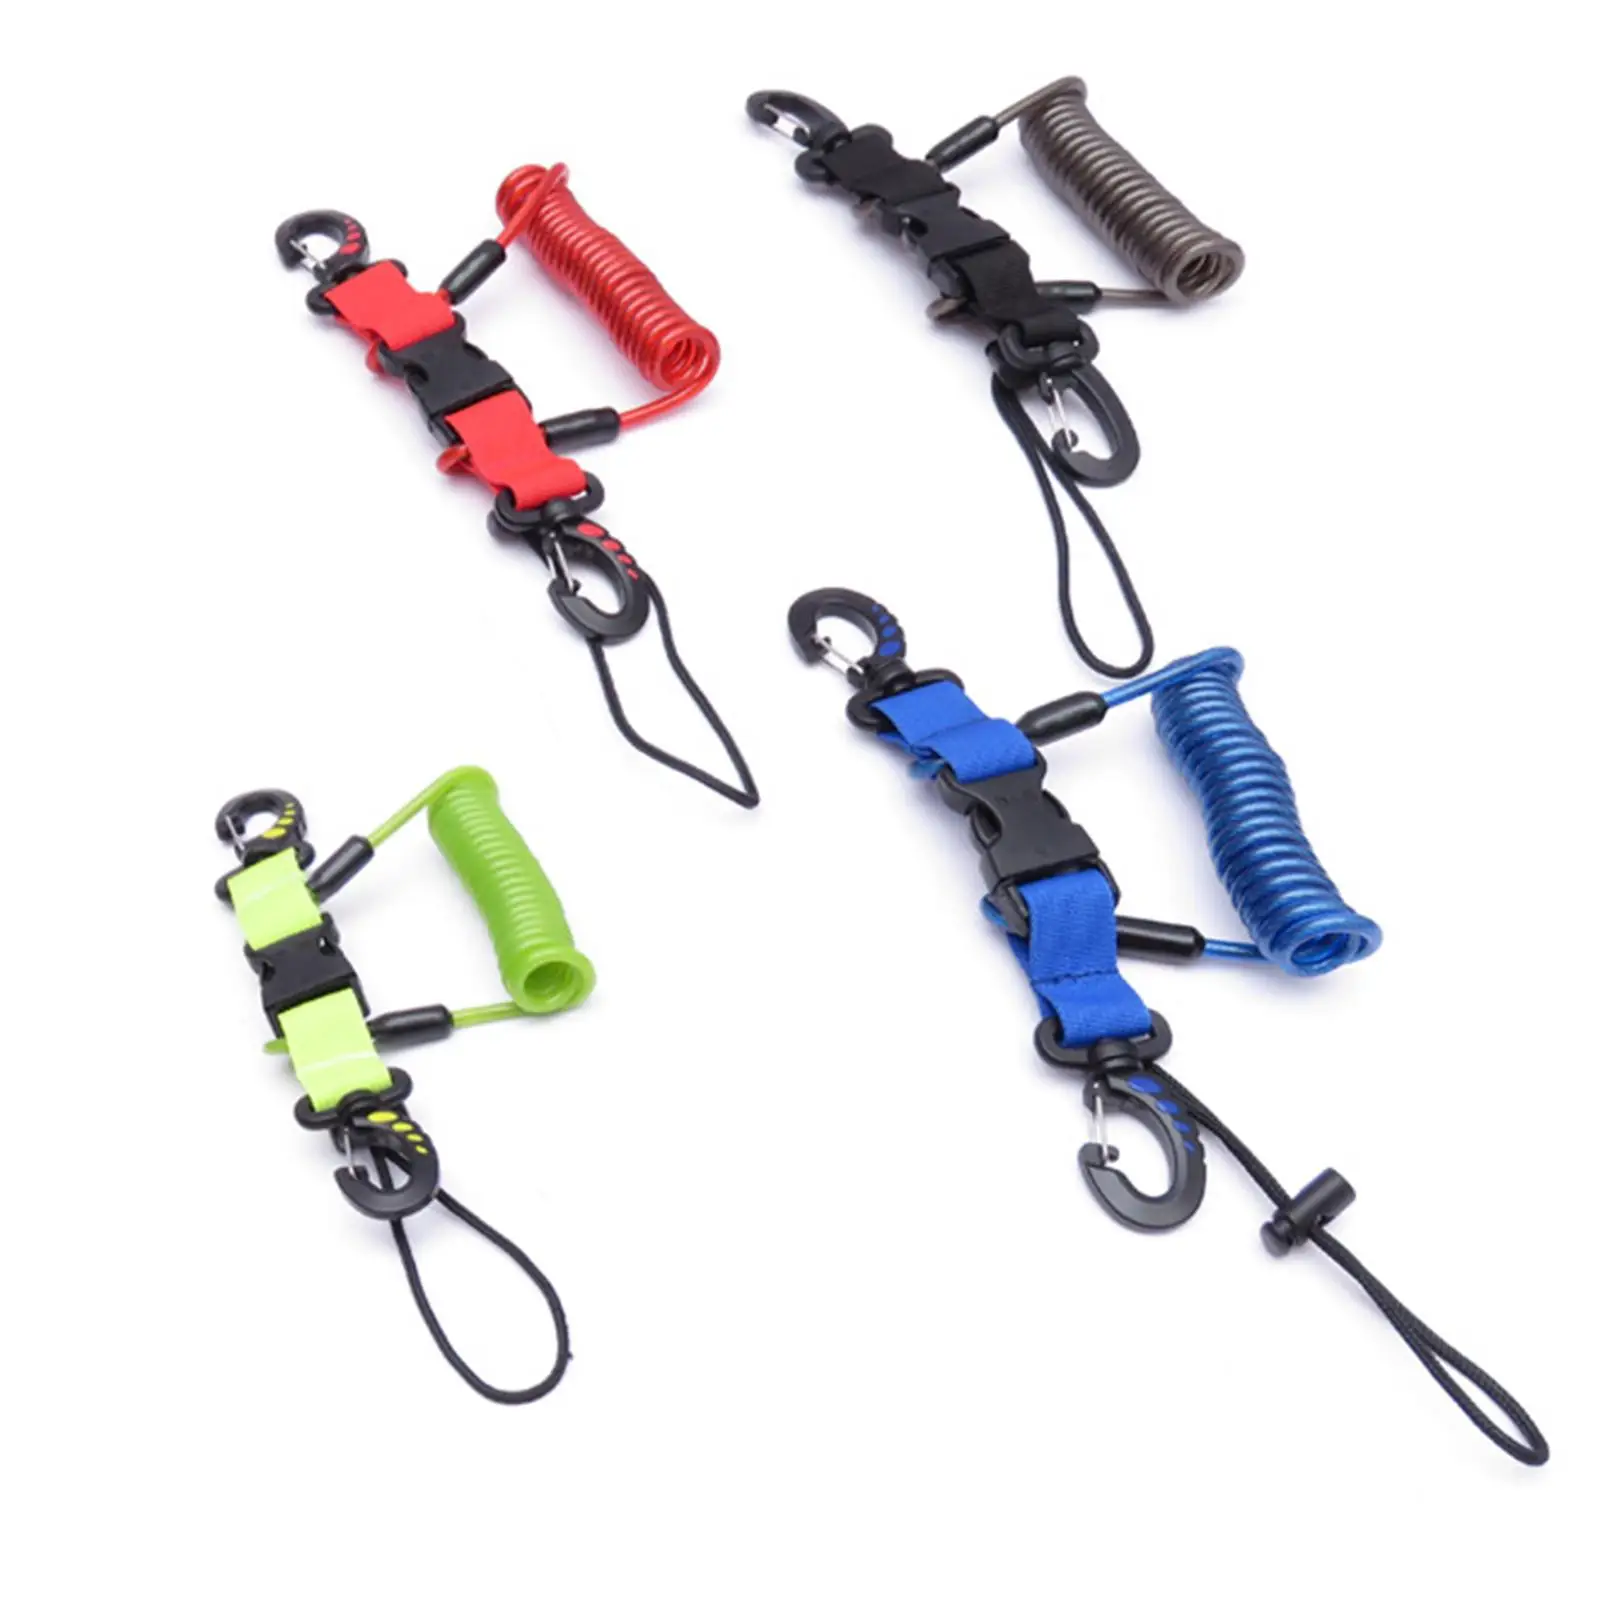 Scuba Dive Coil Camera Lanyard Safety Clip for Torch Underwater Dive Lights